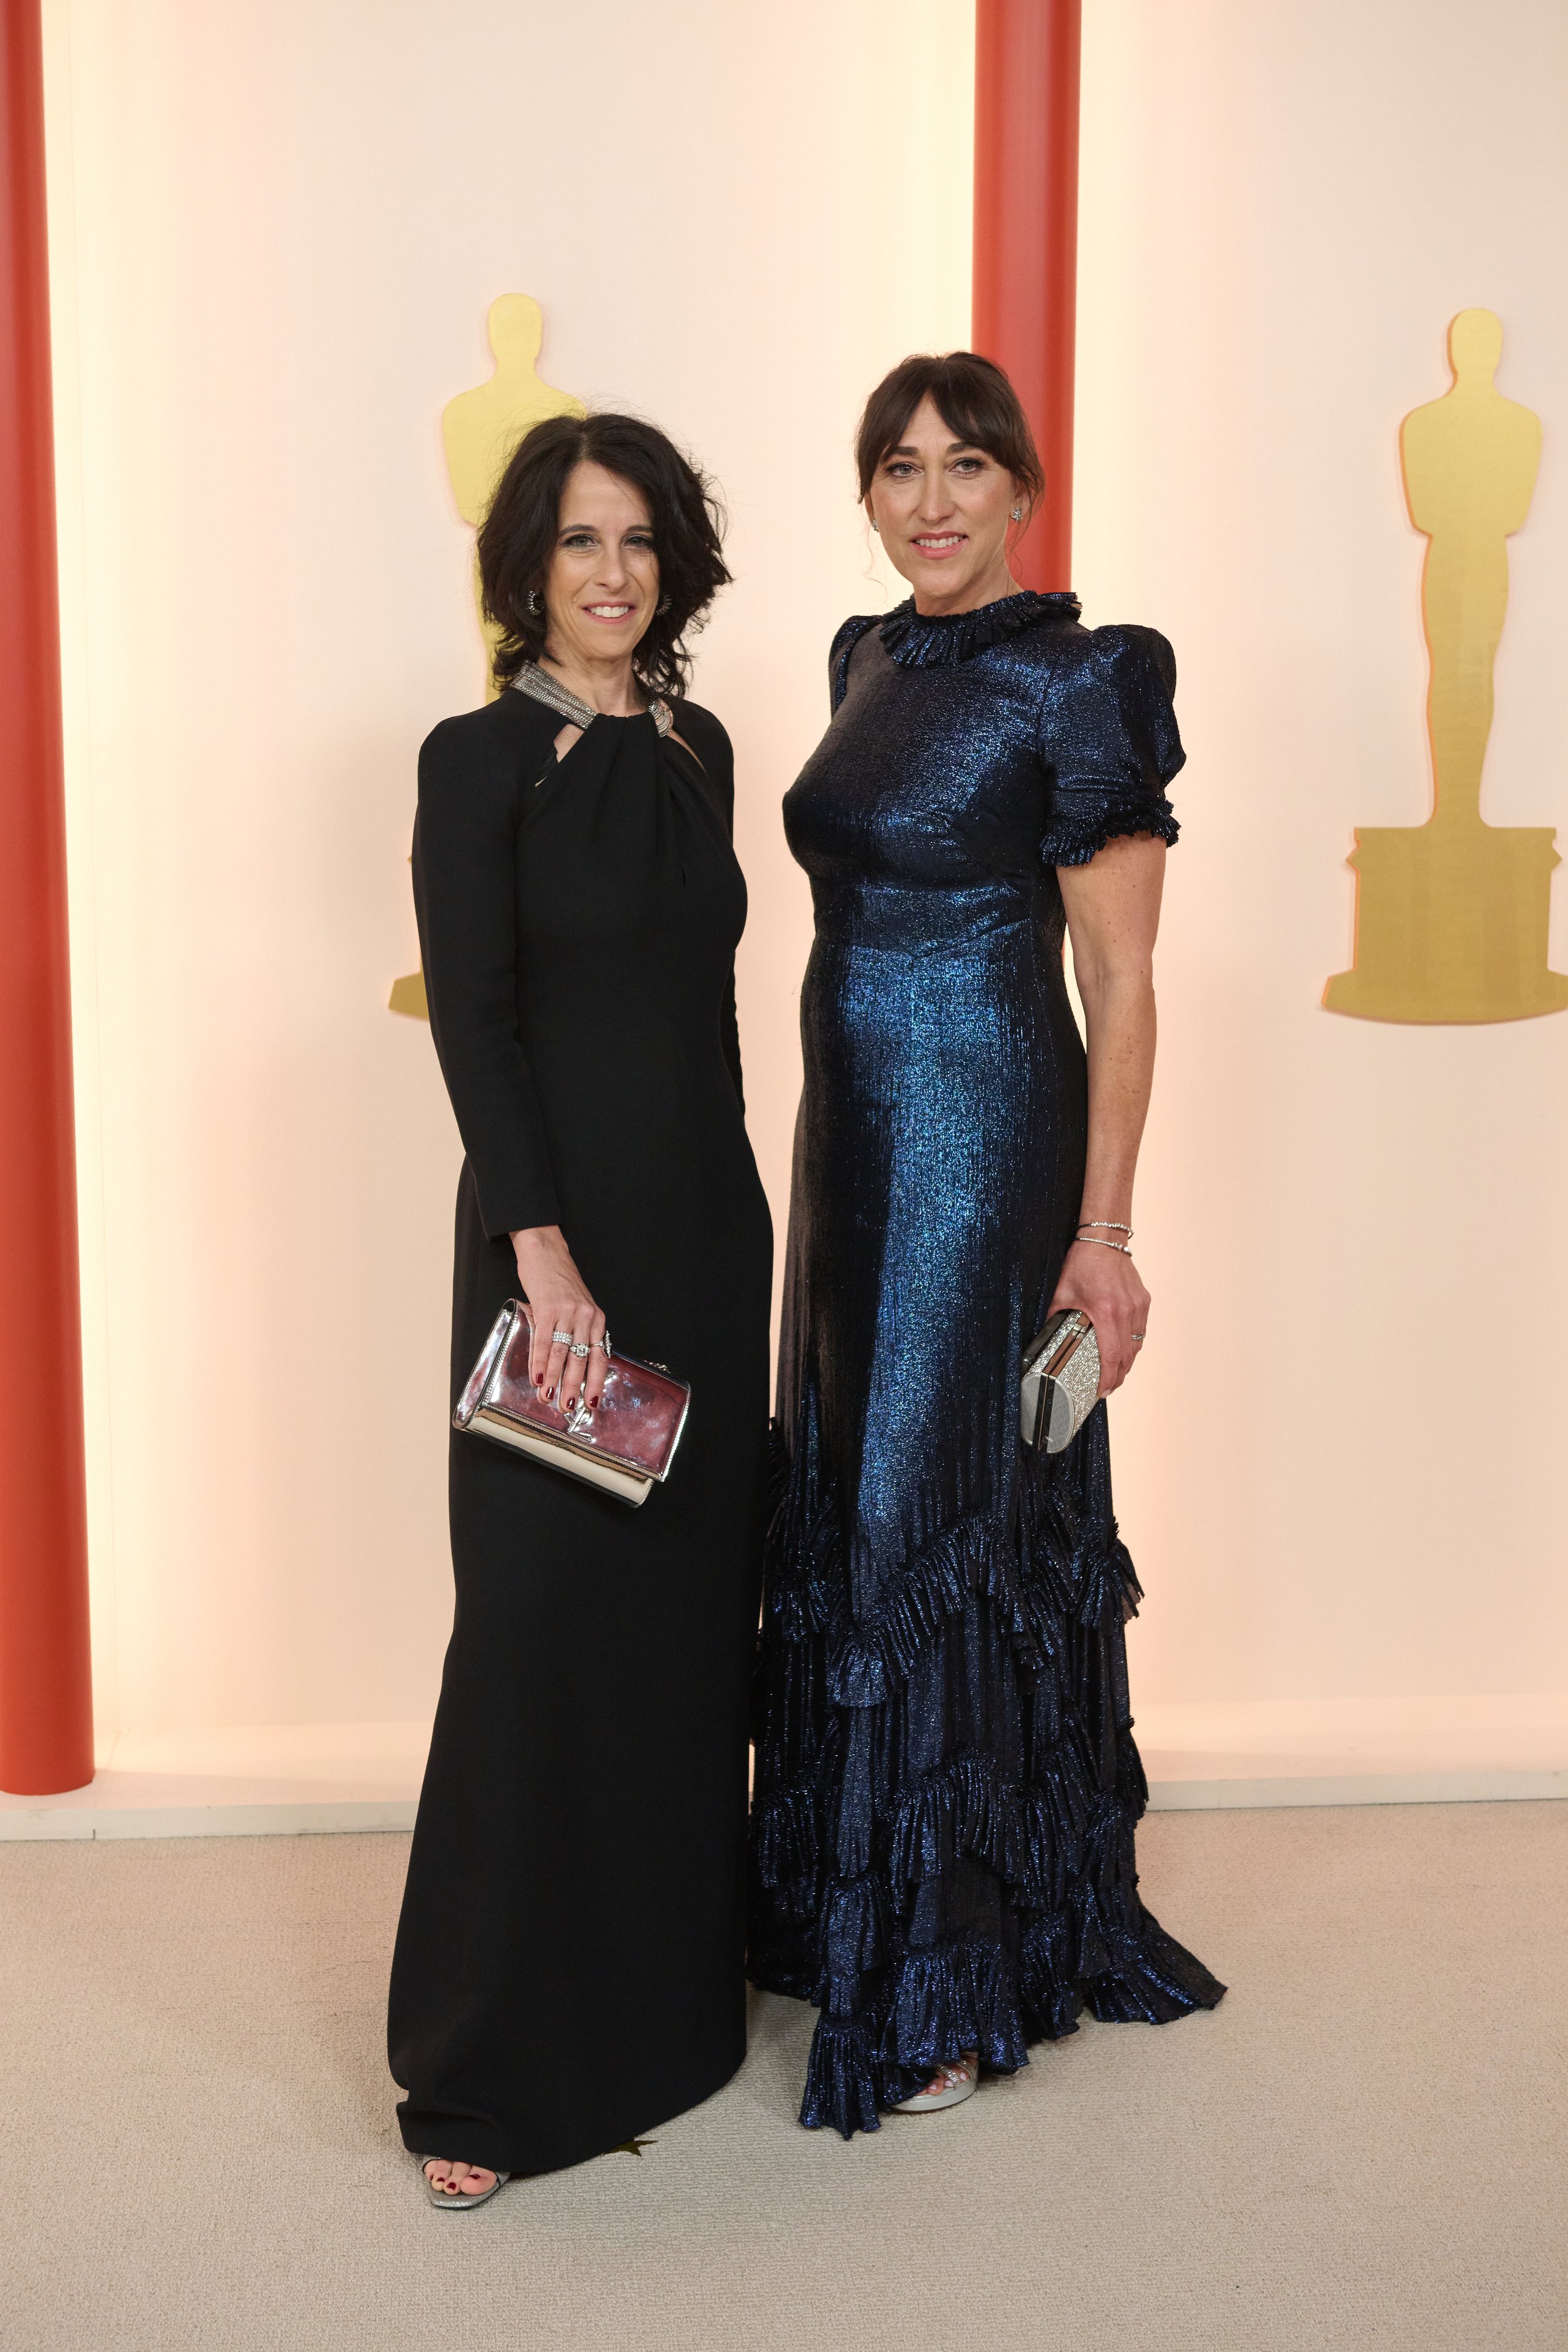 Oscar® nominees Beth Levison and Anne Alvergue arrive on the red carpet of the 95th Oscars